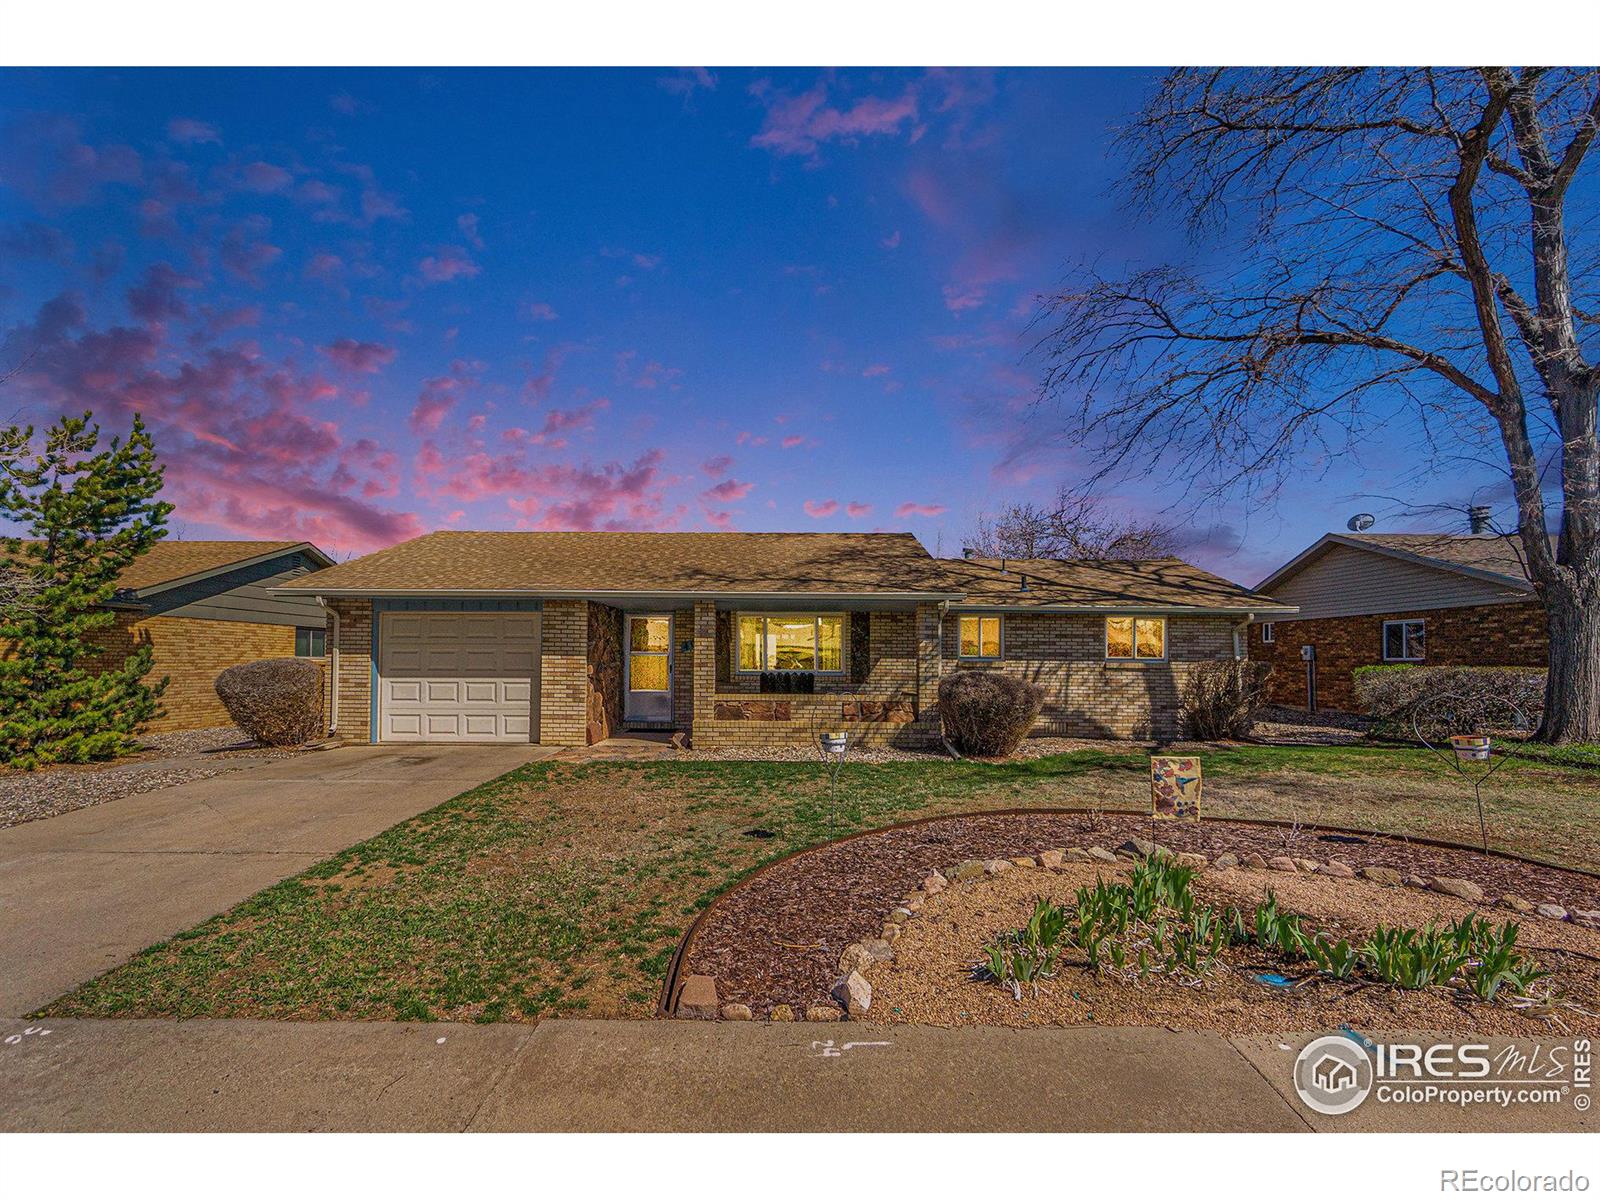 Report Image for 409  Knotty Place,Loveland, Colorado